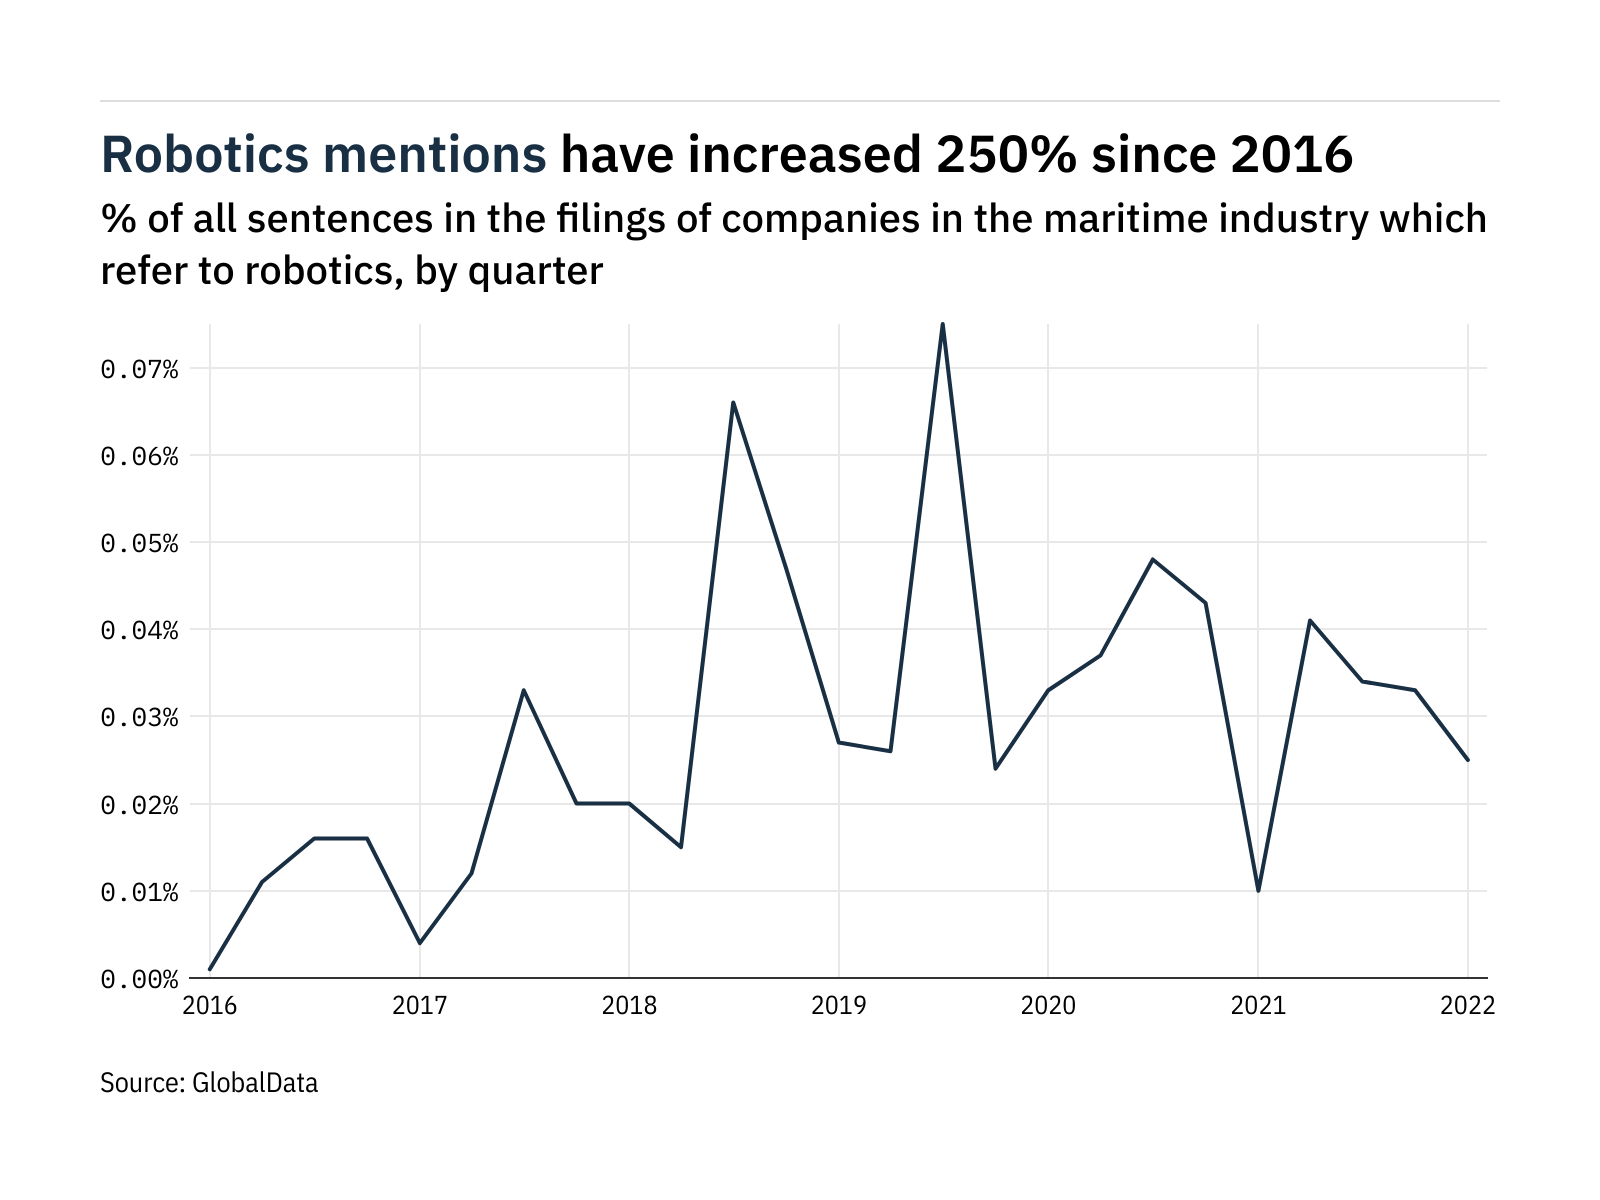 Filings buzz in the maritime industry: 24% decrease in robotics mentions in Q1 of 2022